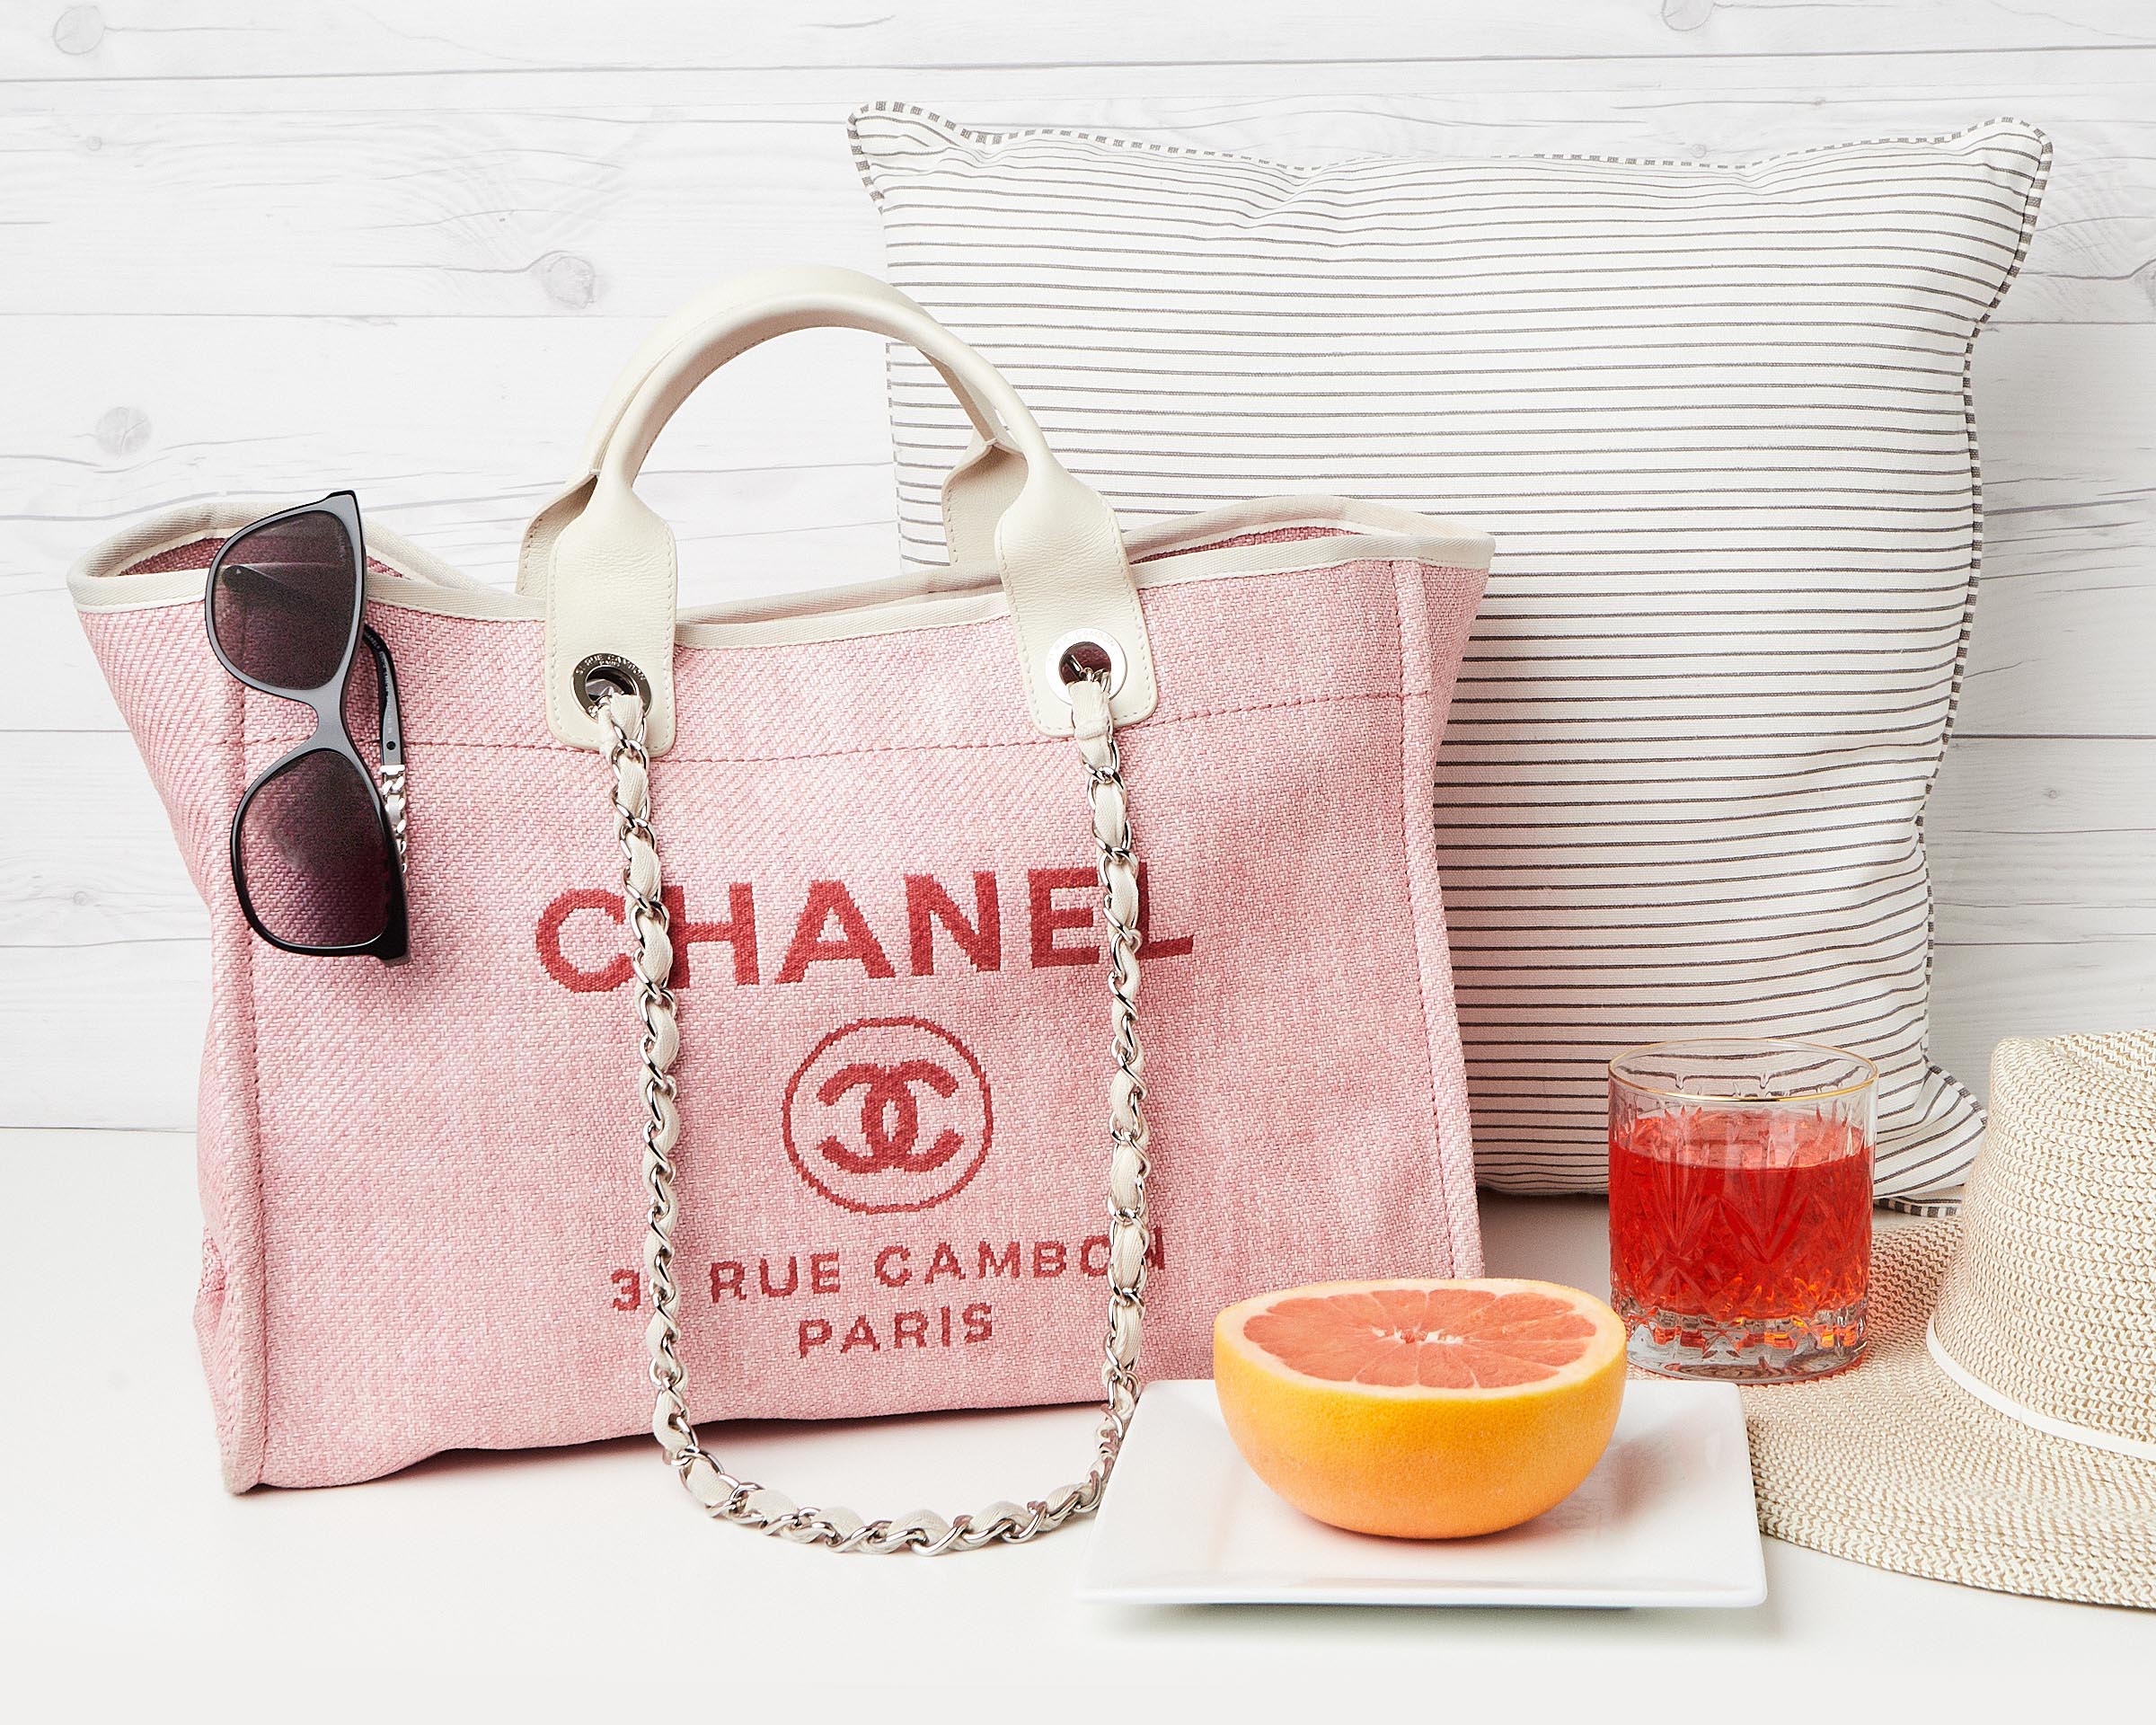 Summer Bag Trends | Chanel Canvas Deauville Tote | Yoogi's Closet Authenticated Pre-Owned Luxury